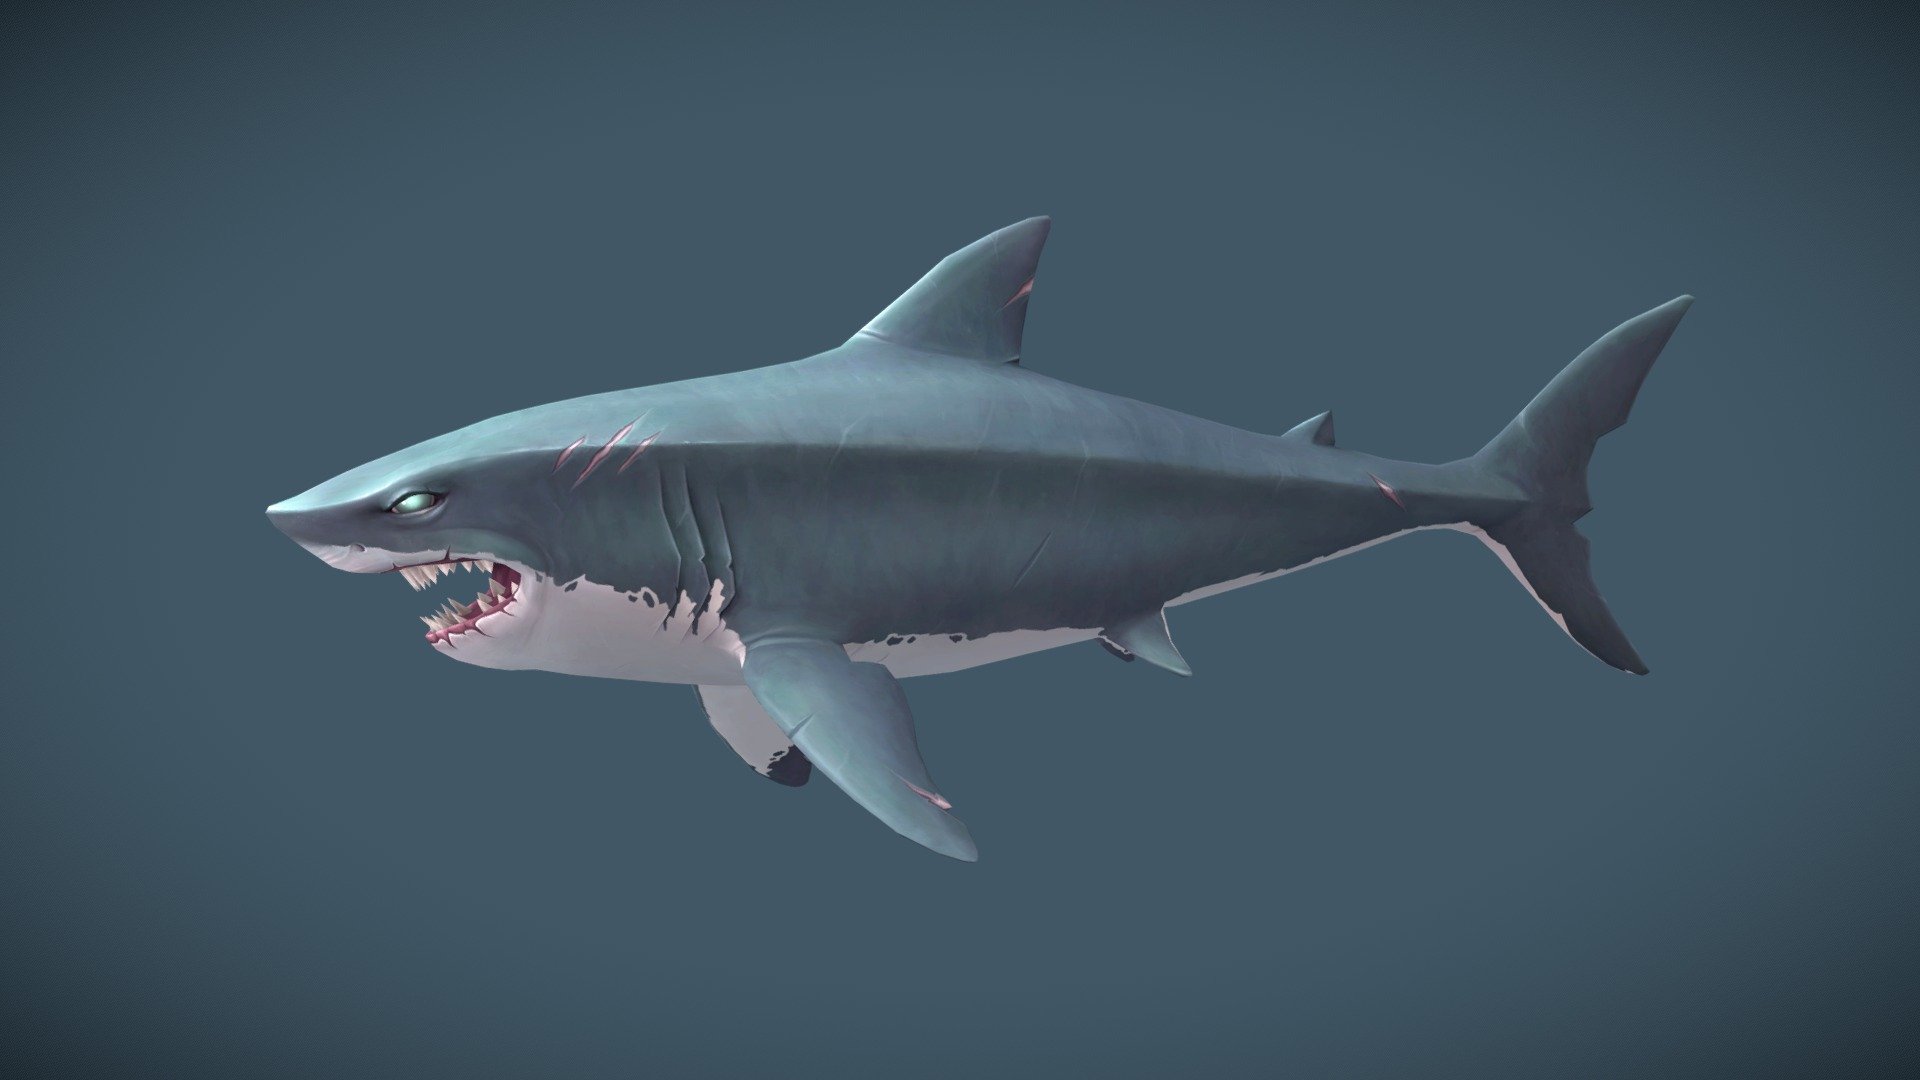 Hello! Here is my shark. It was painted in a mix of substance painter and procreate in hopes to improve my texturing skills further!

I edited and reanimated the shark in blender from a base rig by Jerome Angeles - Handpainted Shark - 3D model by Claire Chidgey (@chidgey) 3d model